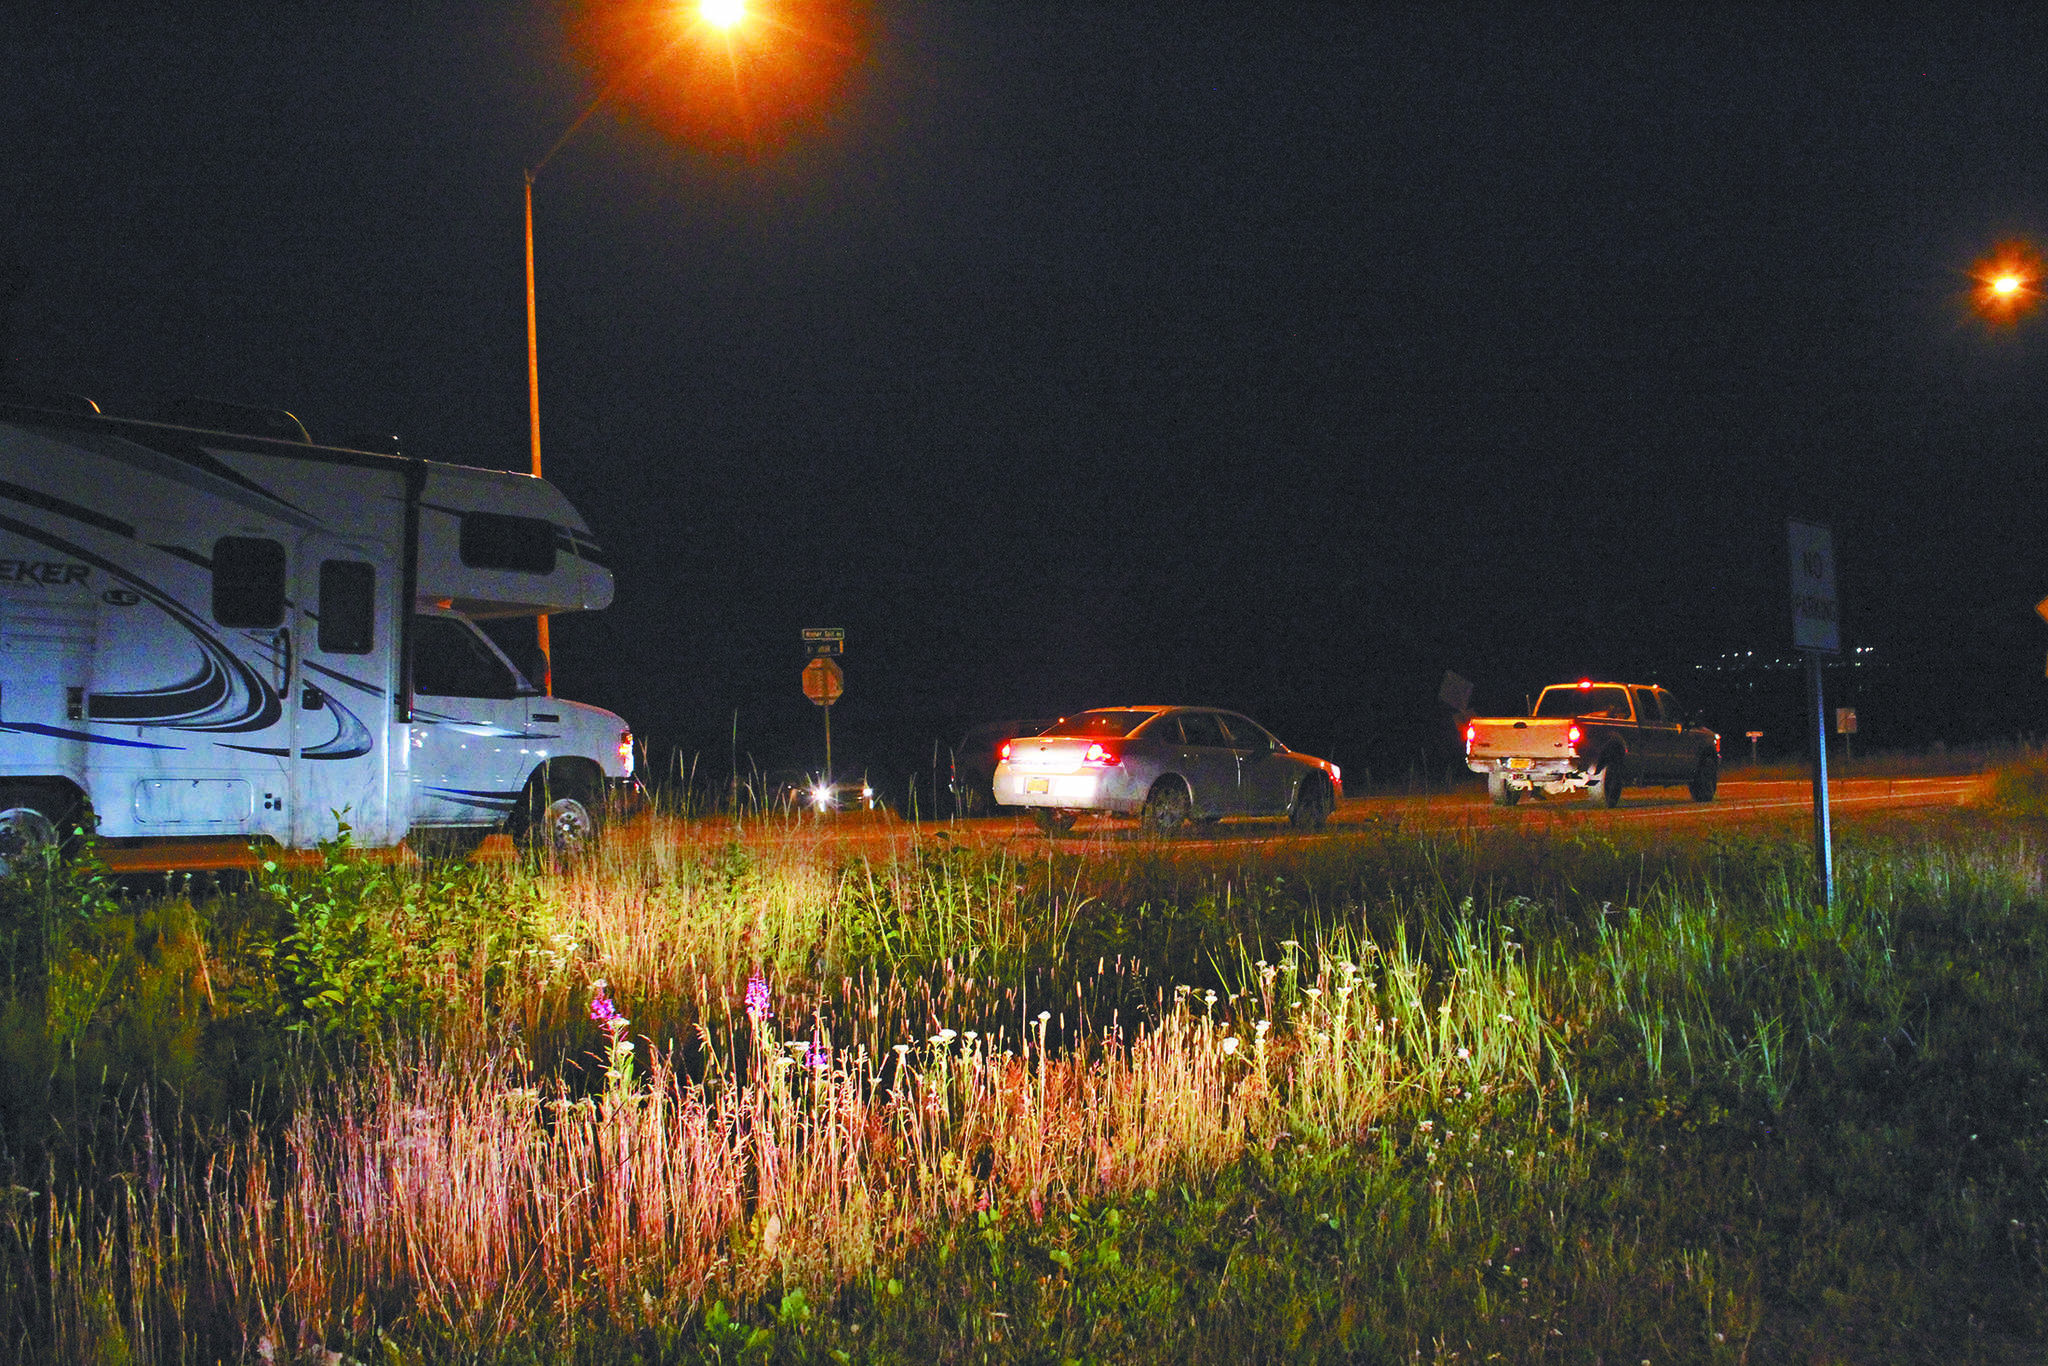 Vehicles are stopped and prevented from entering the Homer Spit on Wednesday, July 23, 2020 in Homer, Alaska. A tsunami warning was put into effect for Kachemak Bay and other areas of Alaska following a 7.8 magnitude earthquake off the Aleutian Chain on Tuesday night. Those in the inundation zone in Homer were asked to evacuate. (Photo by Megan Pacer/Homer News)